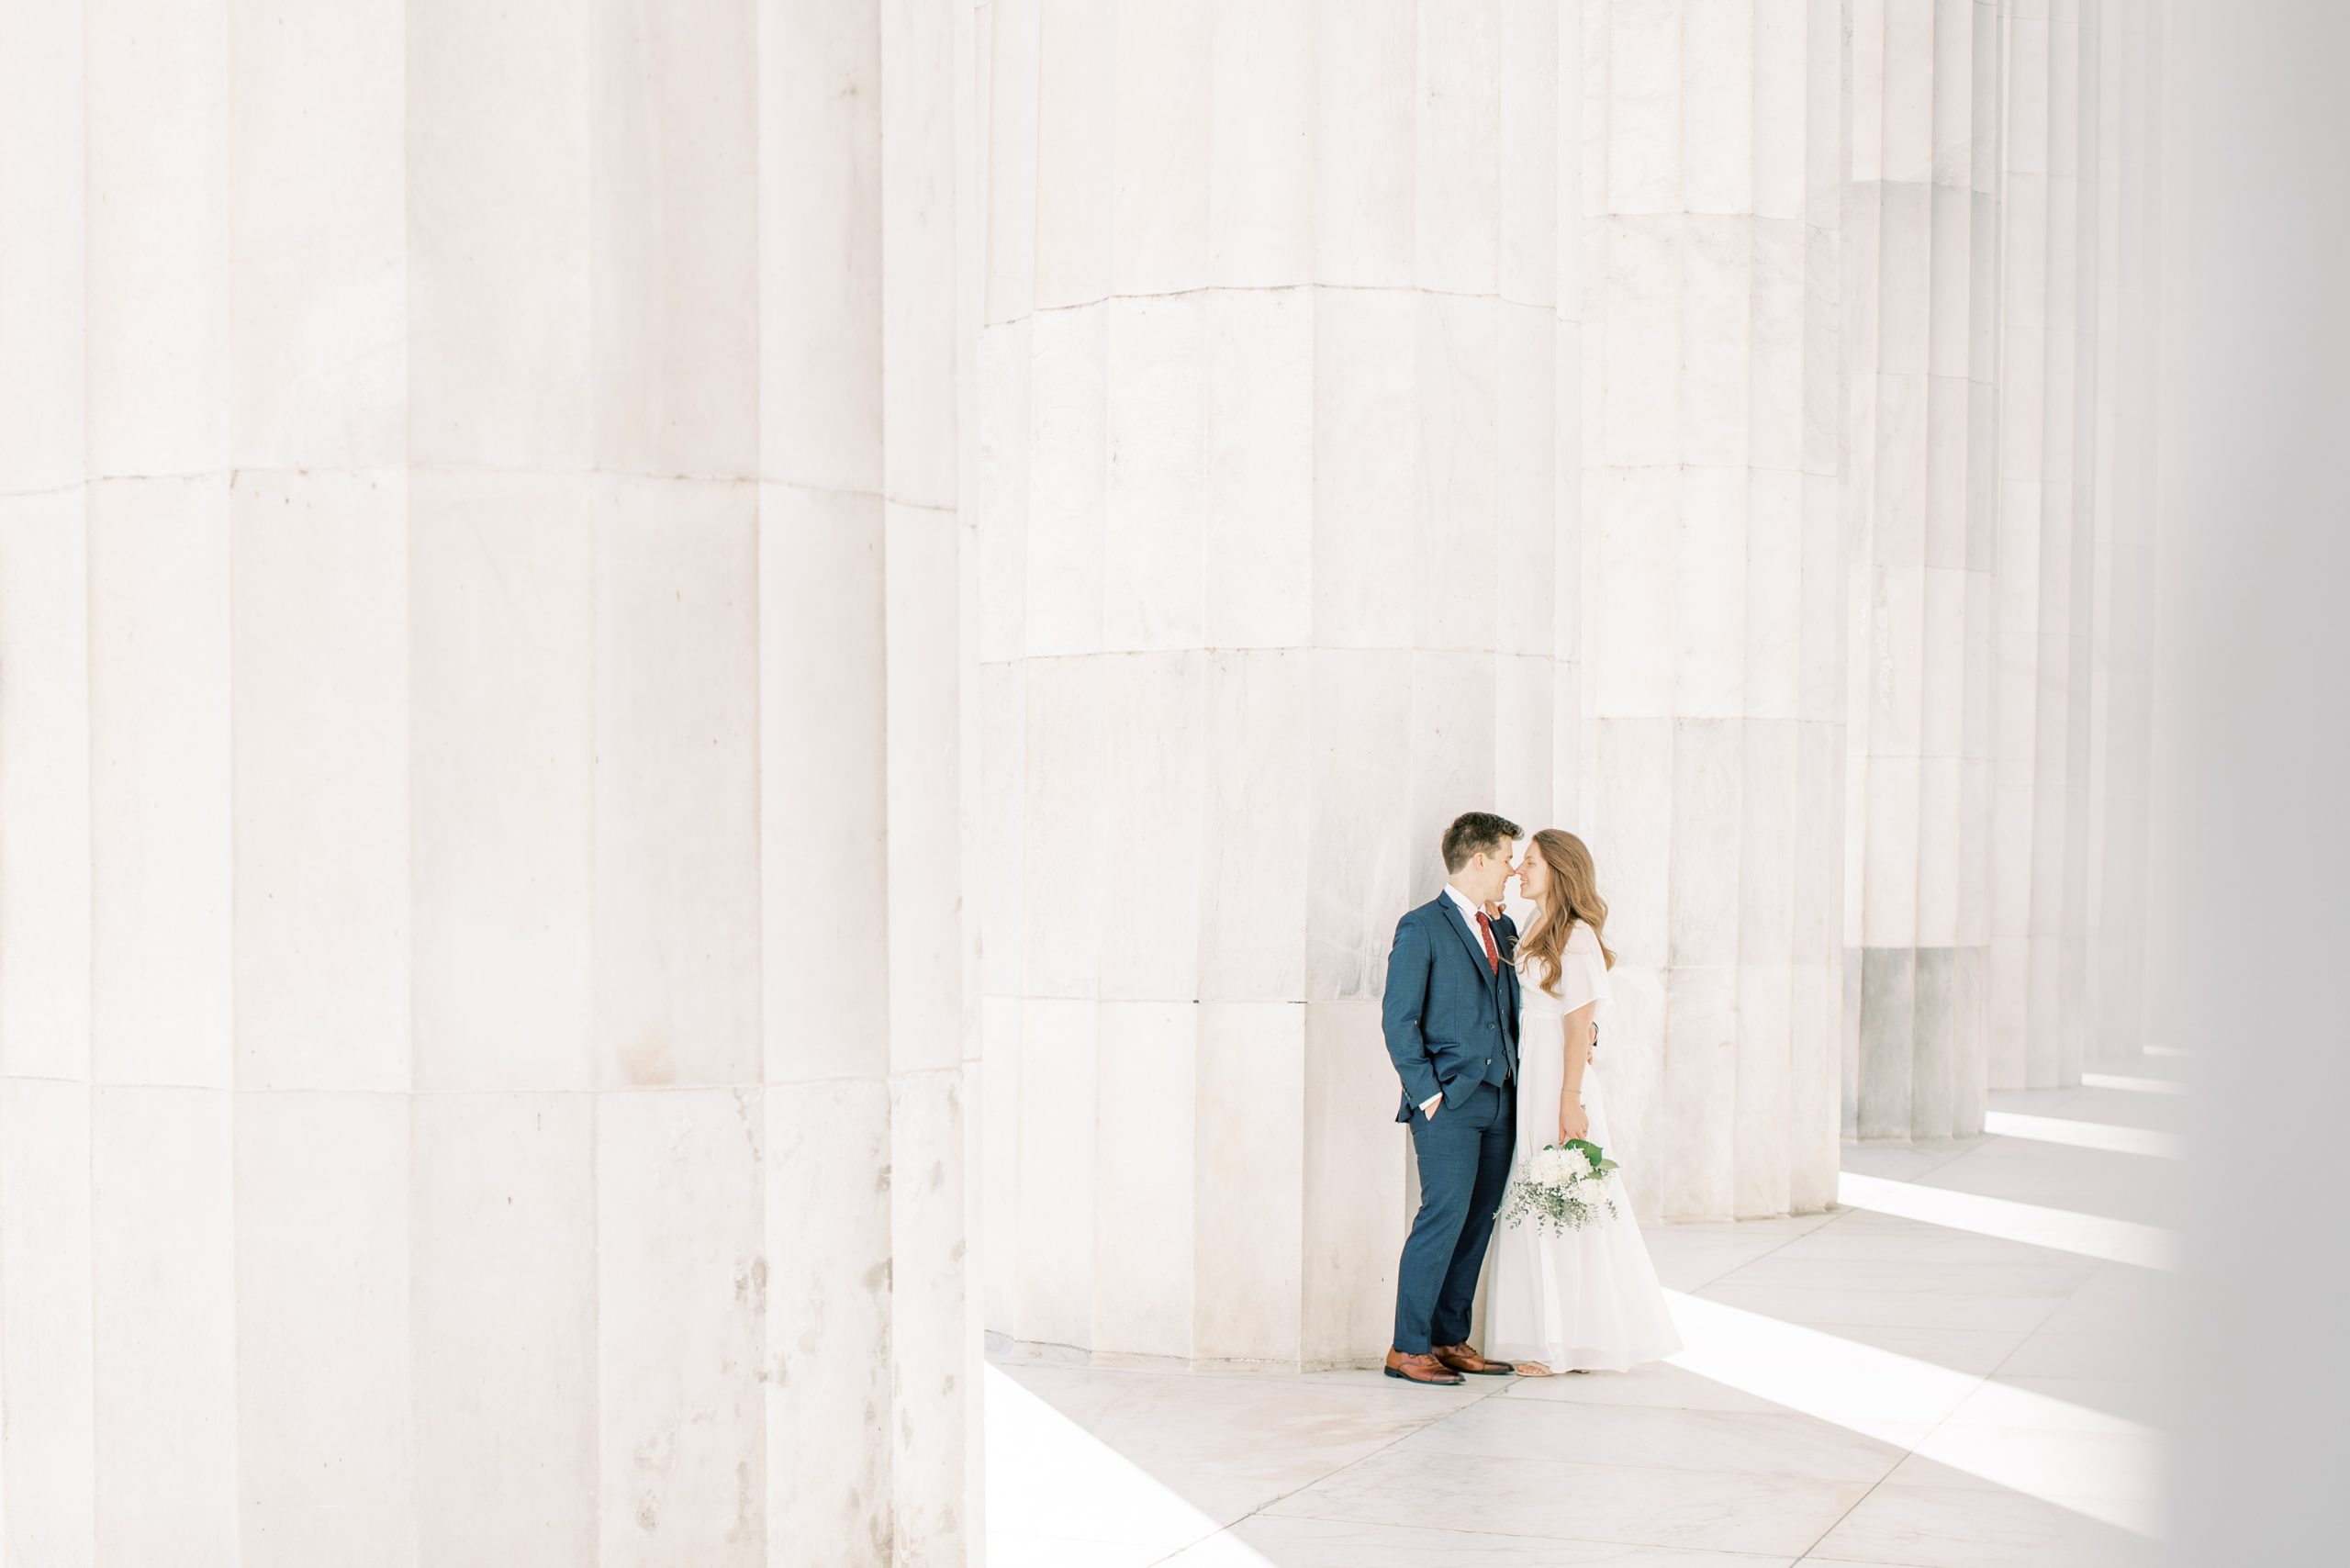 An intimate fall elopement at the DC War Memorial in Washington, DC with newlywed portraits following at the Lincoln Memorial.